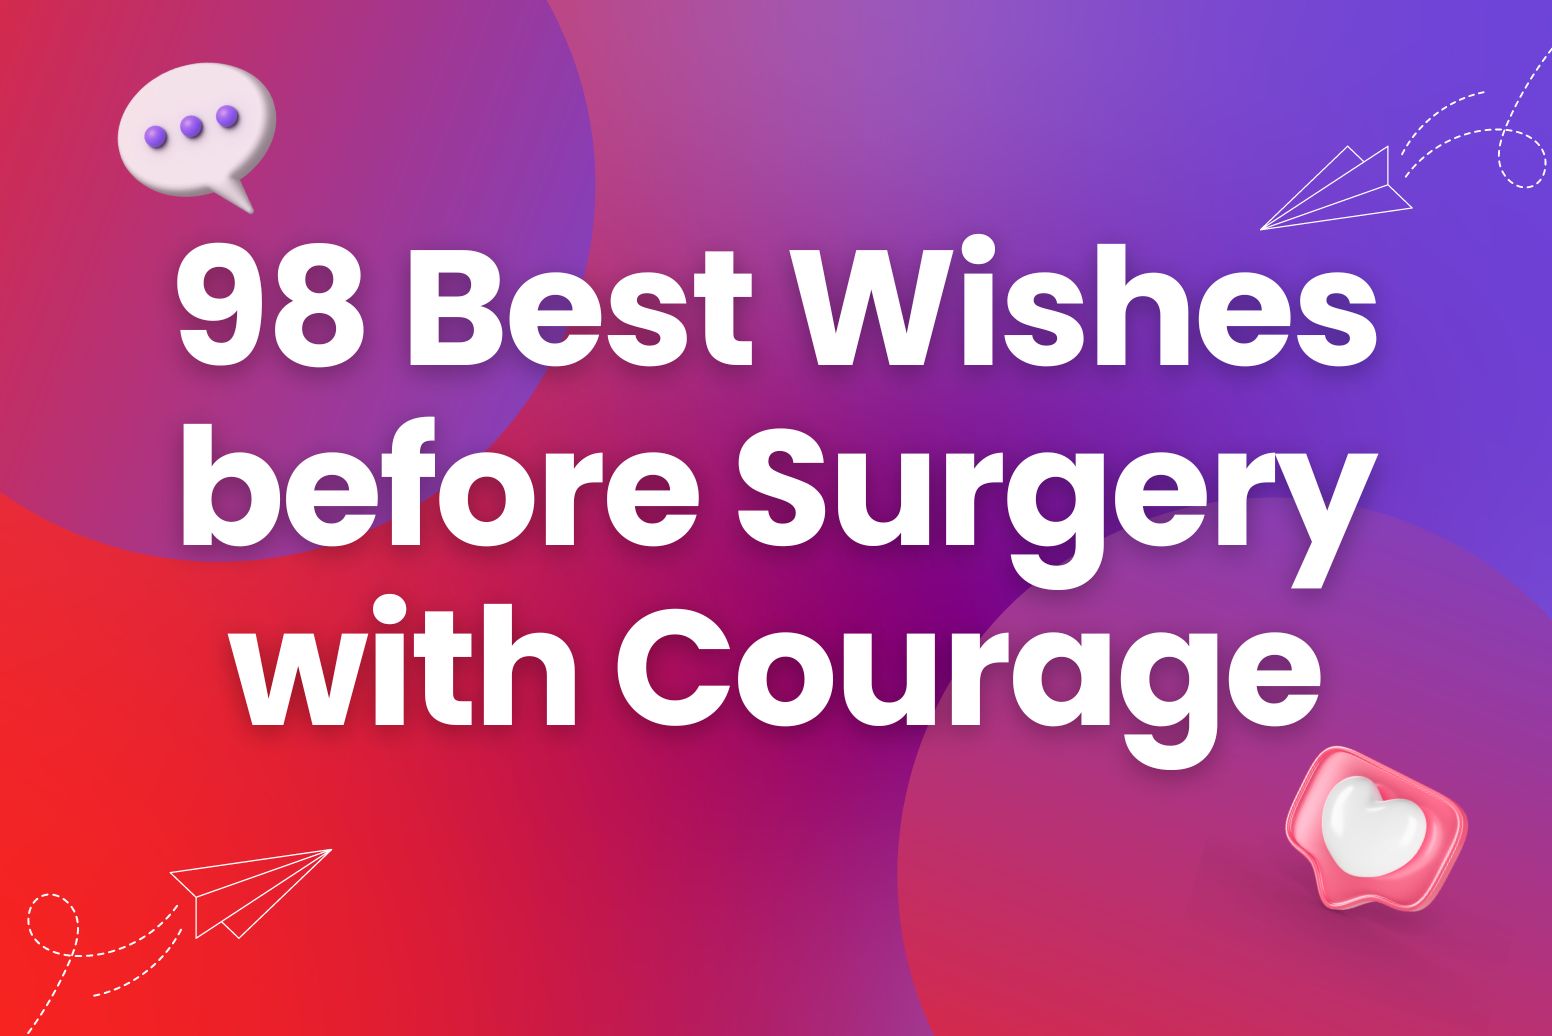 98 Best Wishes before Surgery with Courage